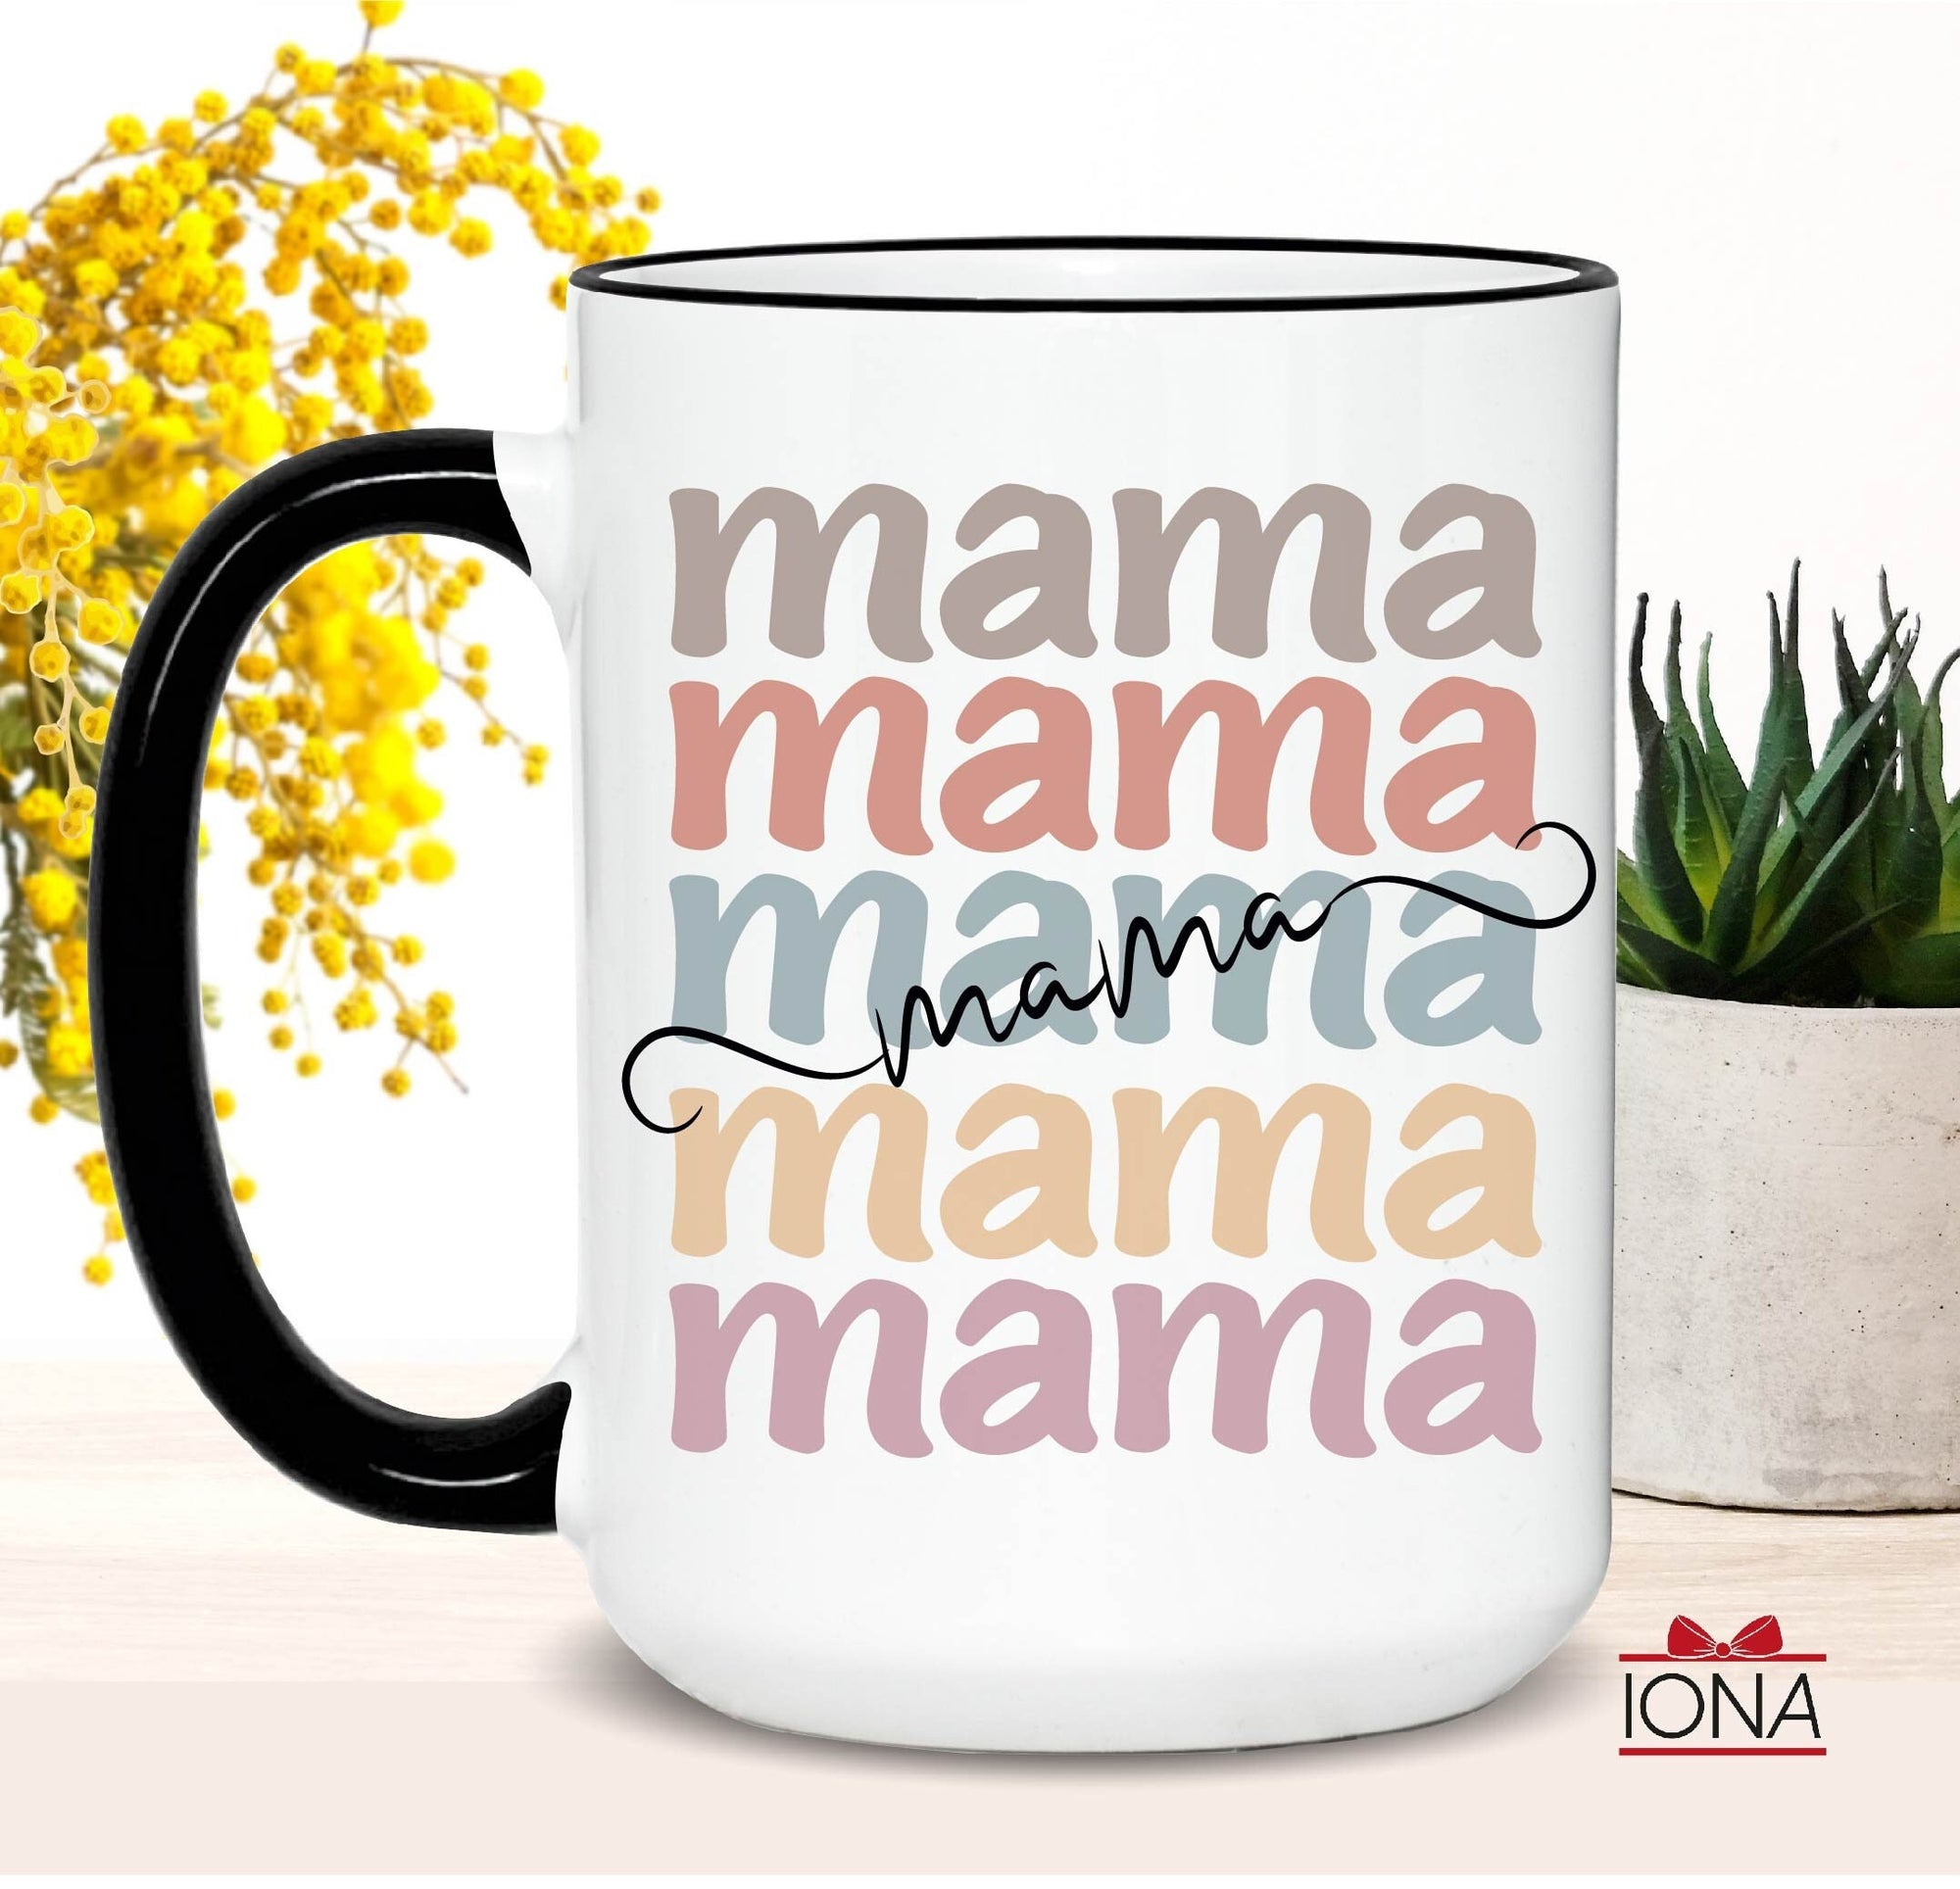 Groovy Mama Coffee Mug, Mama Vibes, Mom Life, Mothers Day Gift Idea, Mothers Birthday Gift from Daughter, Mother's Day Christmas Gift Cup